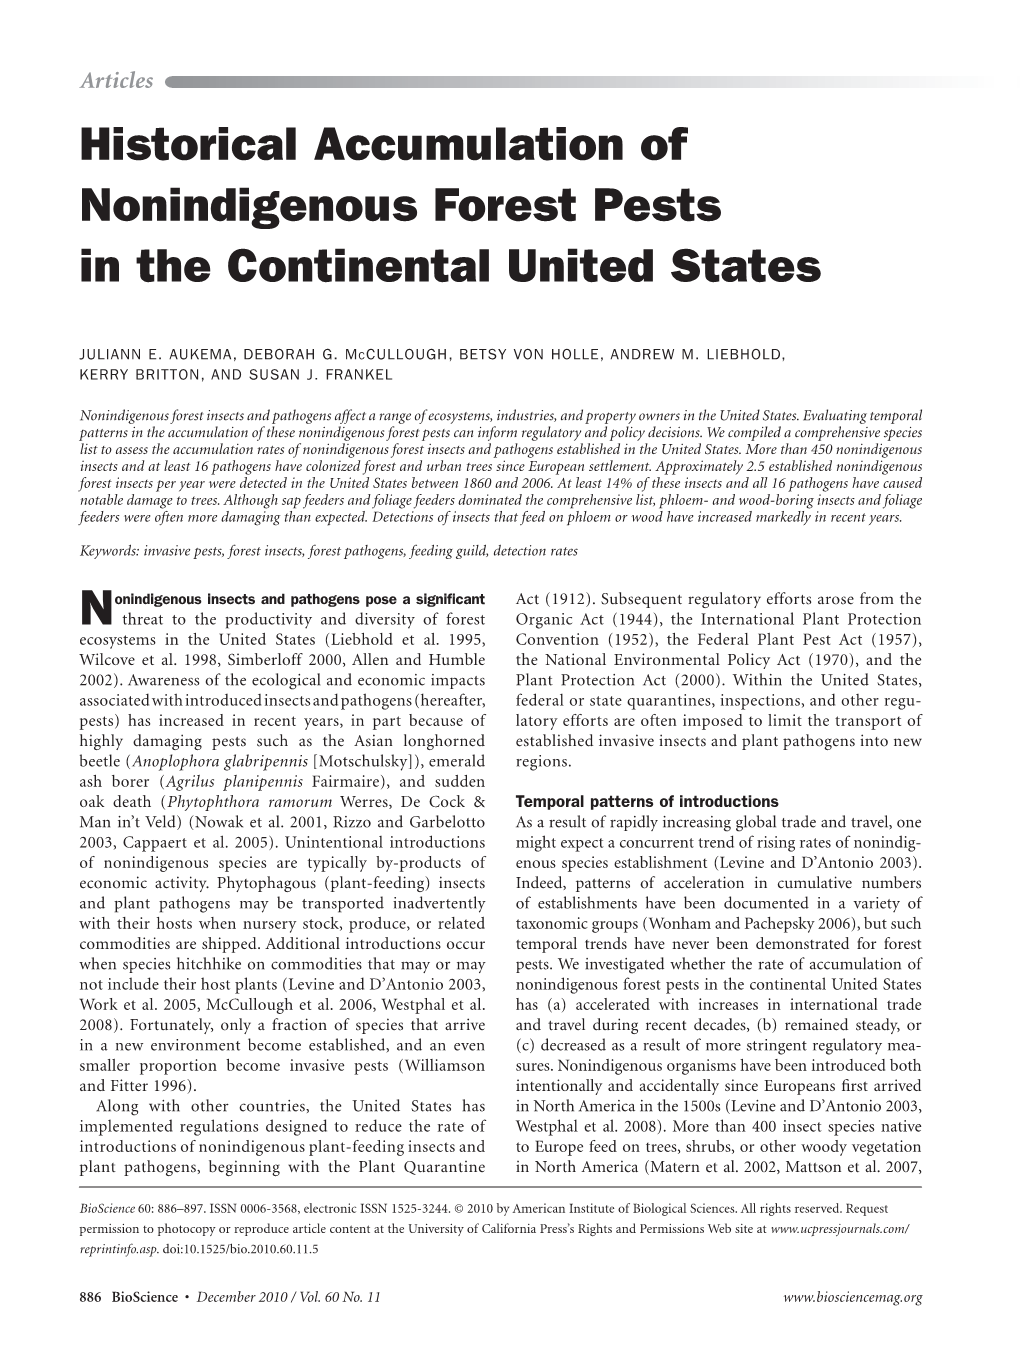 Historical Accumulation of Nonindigenous Forest Pests in the Continental United States